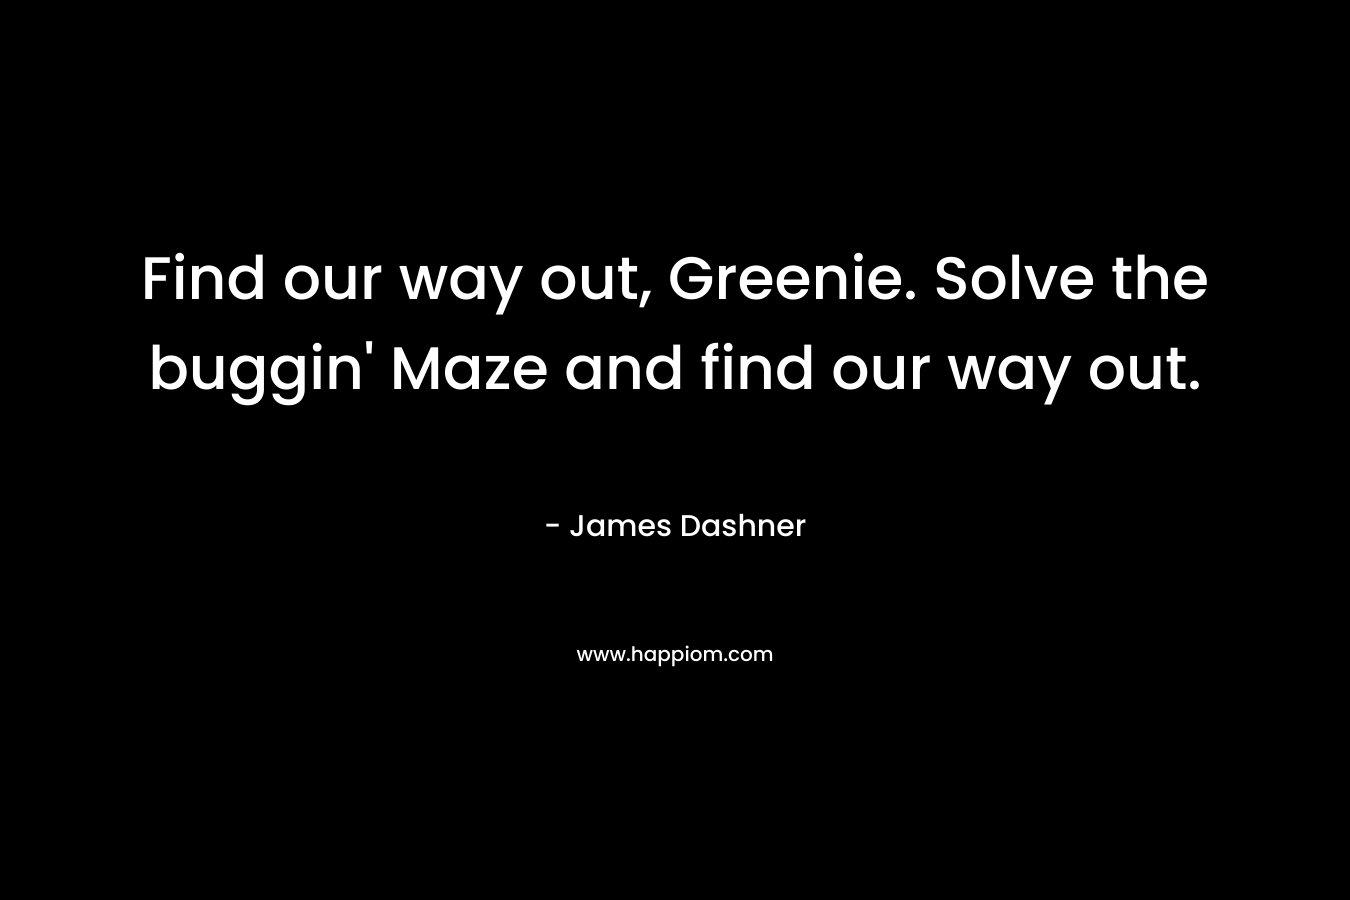 Find our way out, Greenie. Solve the buggin’ Maze and find our way out. – James Dashner